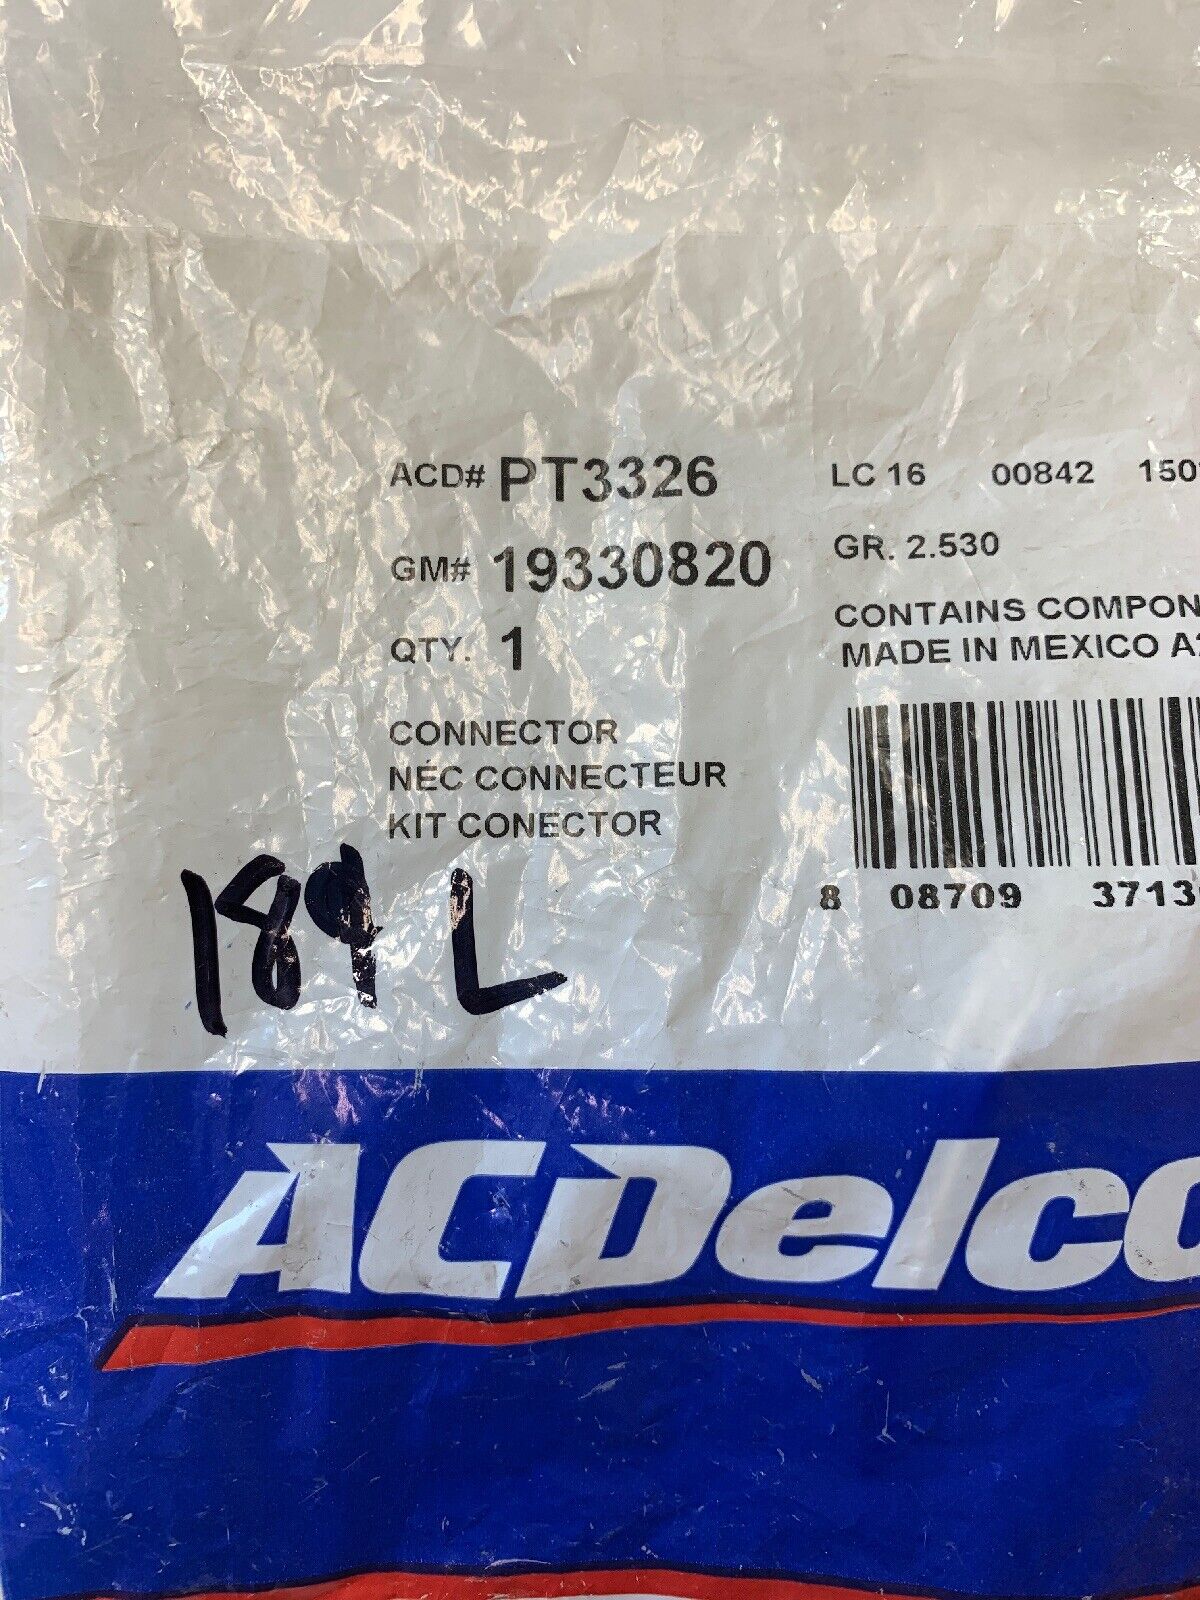 New OEM AcDelco Connector Pigtail Pt3326 19330820